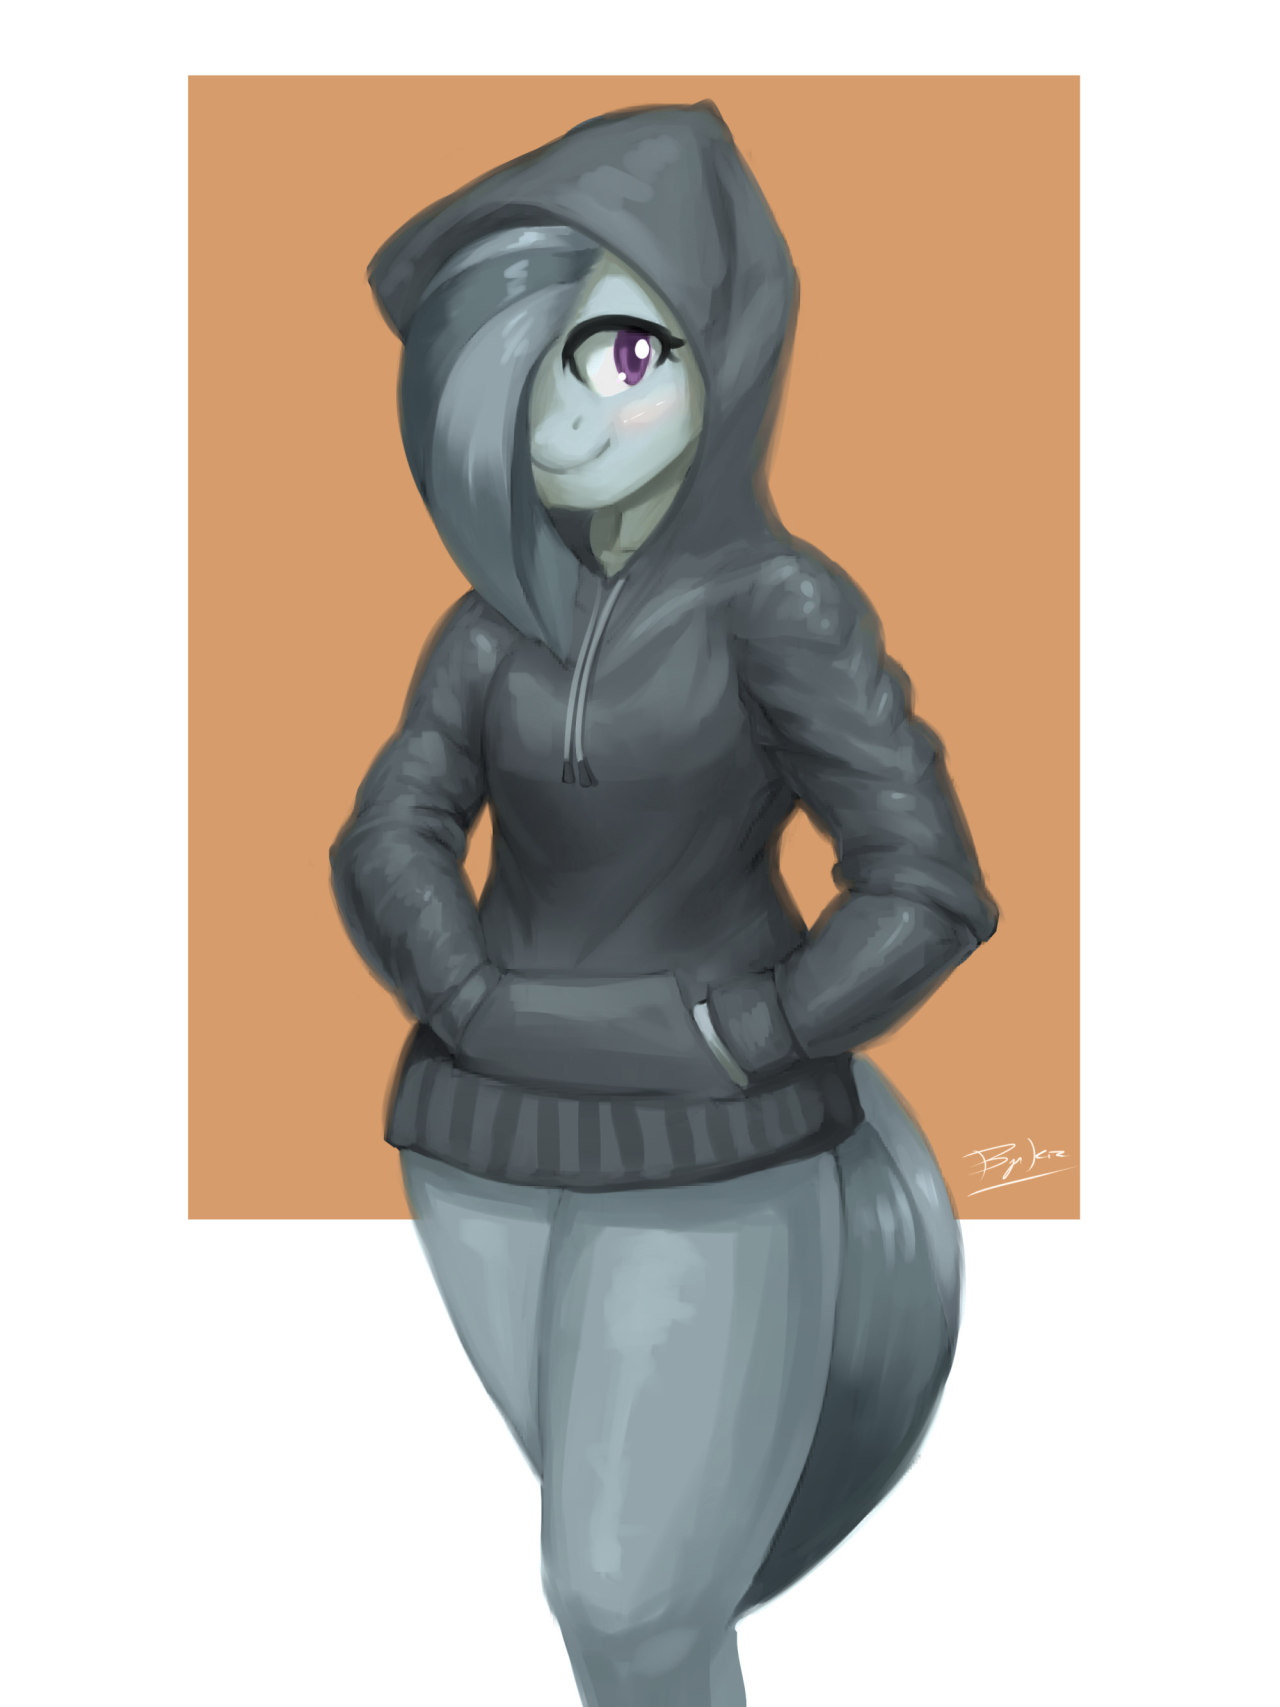 Marble hoodiejust a quick sfw drawinview on deviantart&mdash;&mdash;&mdash;&mdash;&mdash;&mdash;&mdash;&mdash;&mdash;&mdash;&mdash;&mdash;&mdash;&mdash;&mdash;&mdash;&mdash;&mdash;&mdash;&mdash;&mdash;&mdash;&mdash;&mdash;If